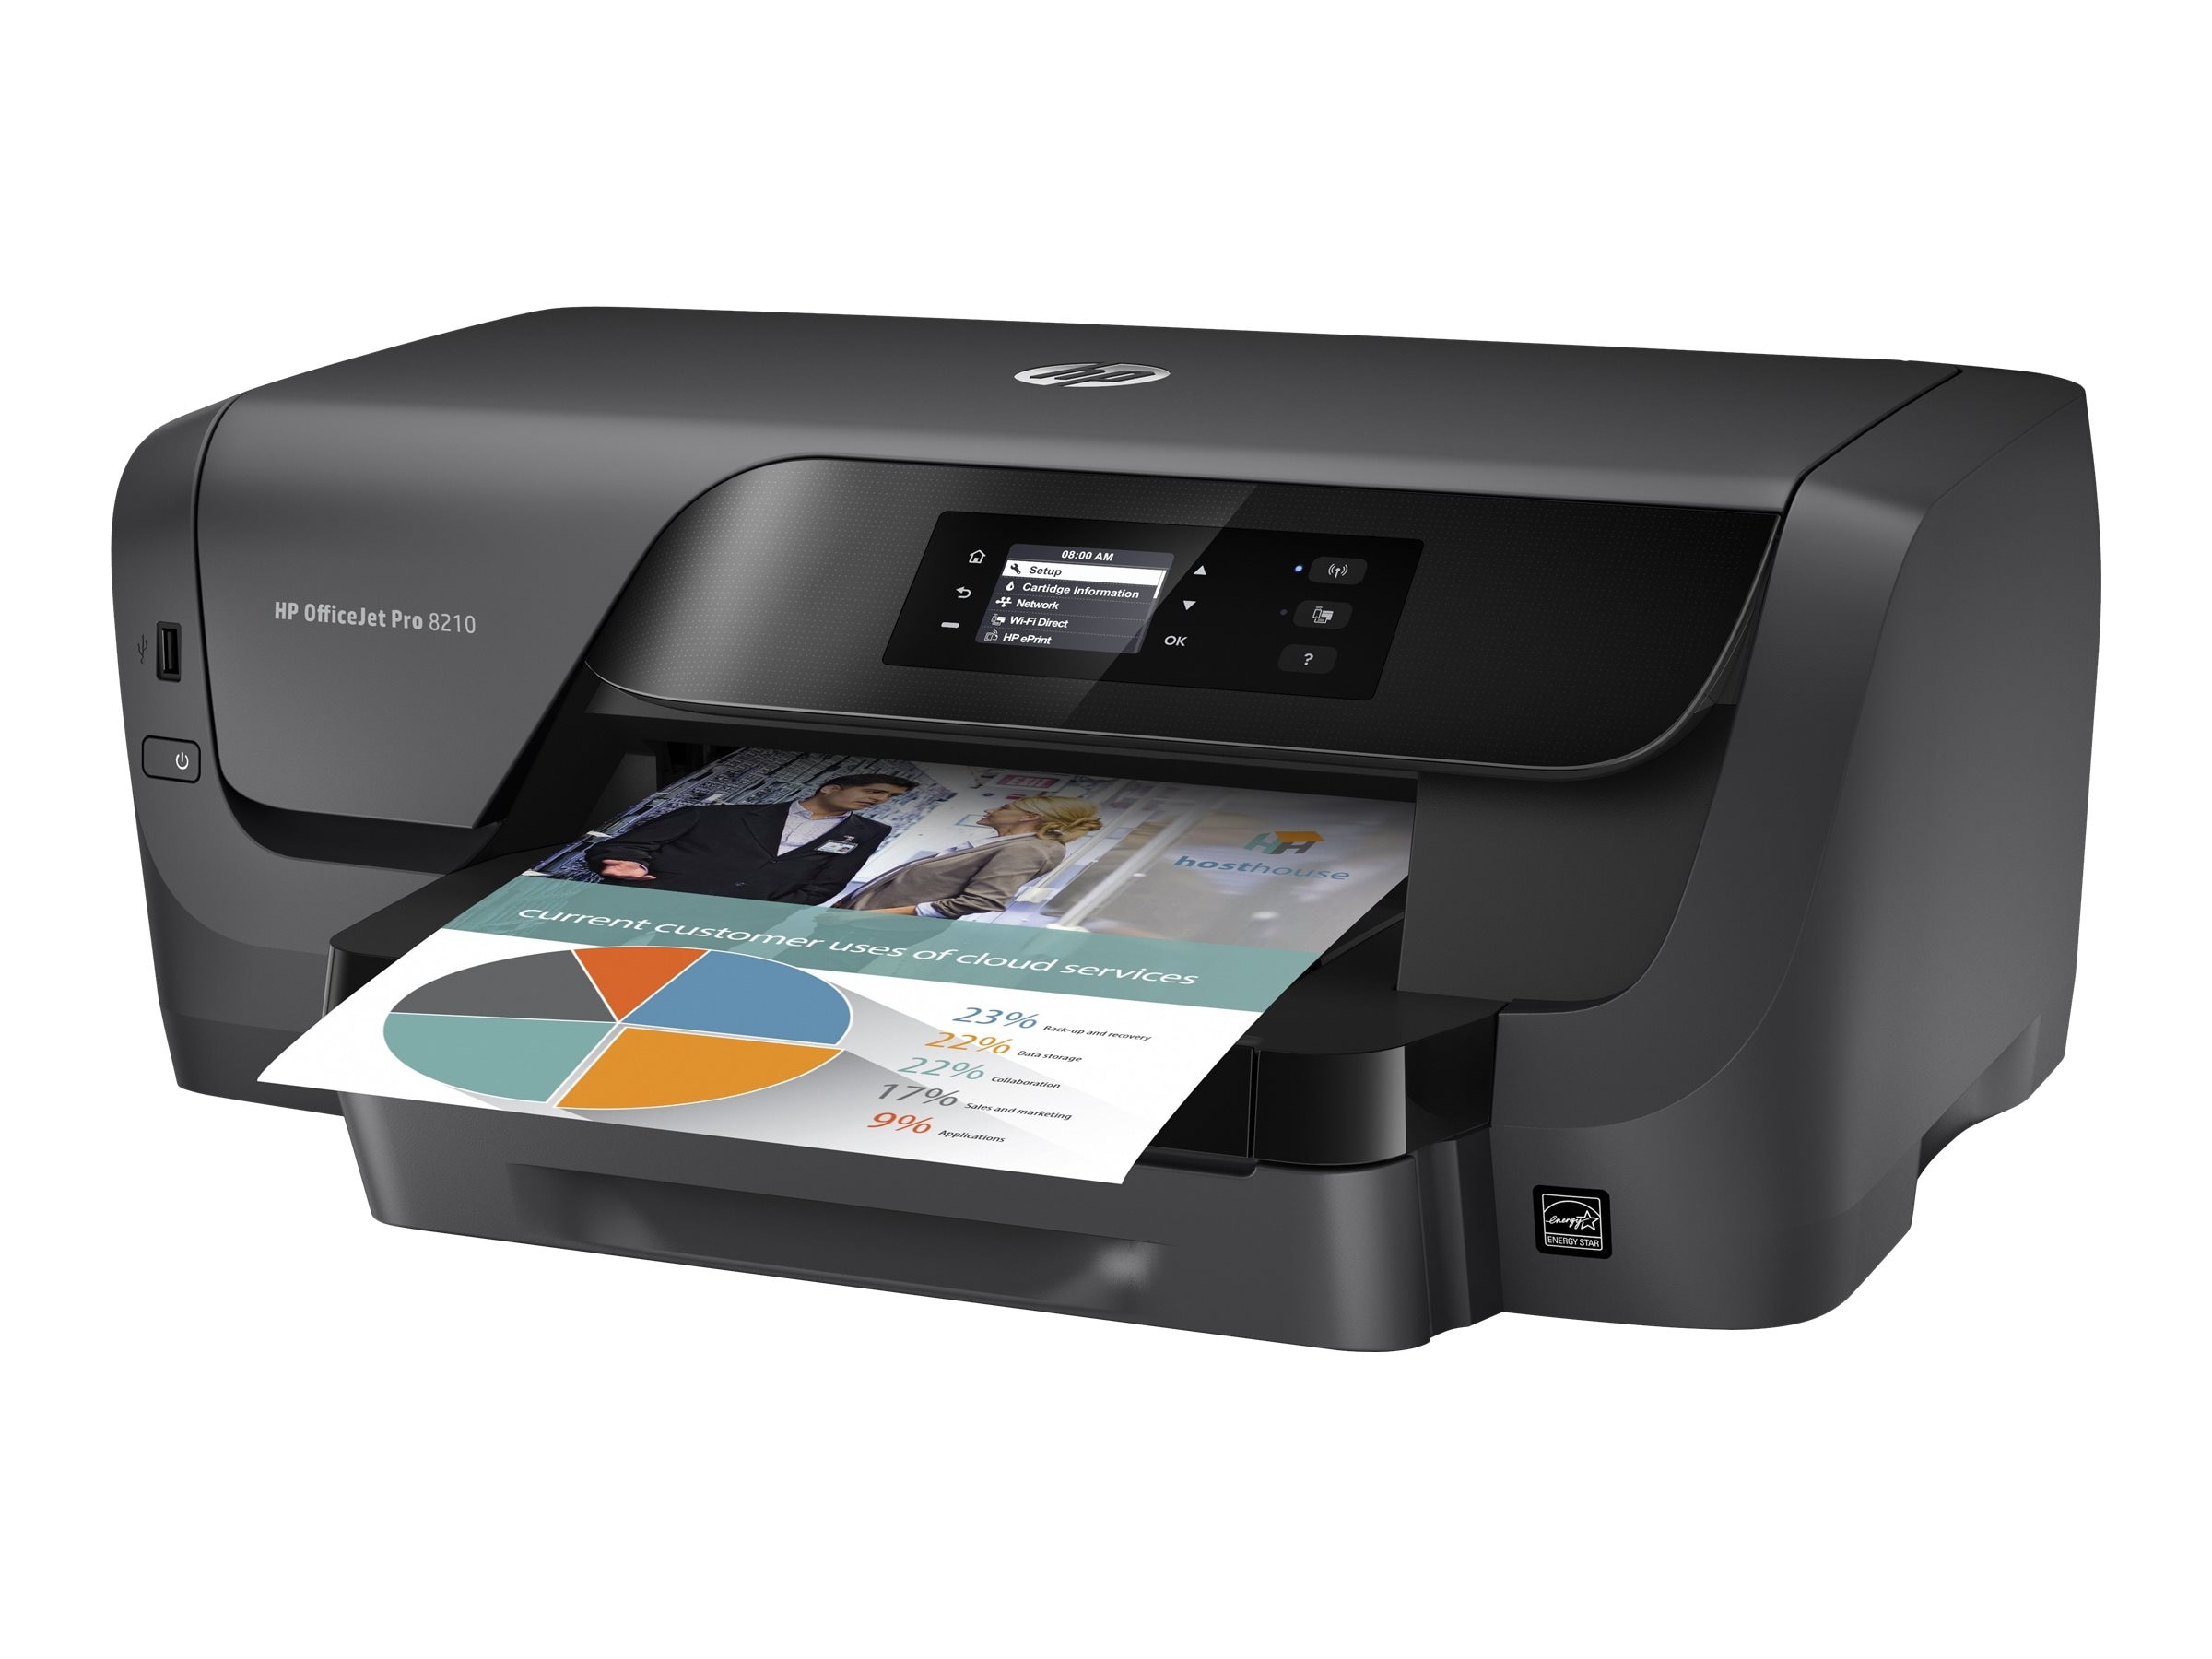 Buy HP Officejet 8210 Printer at Connection Sector